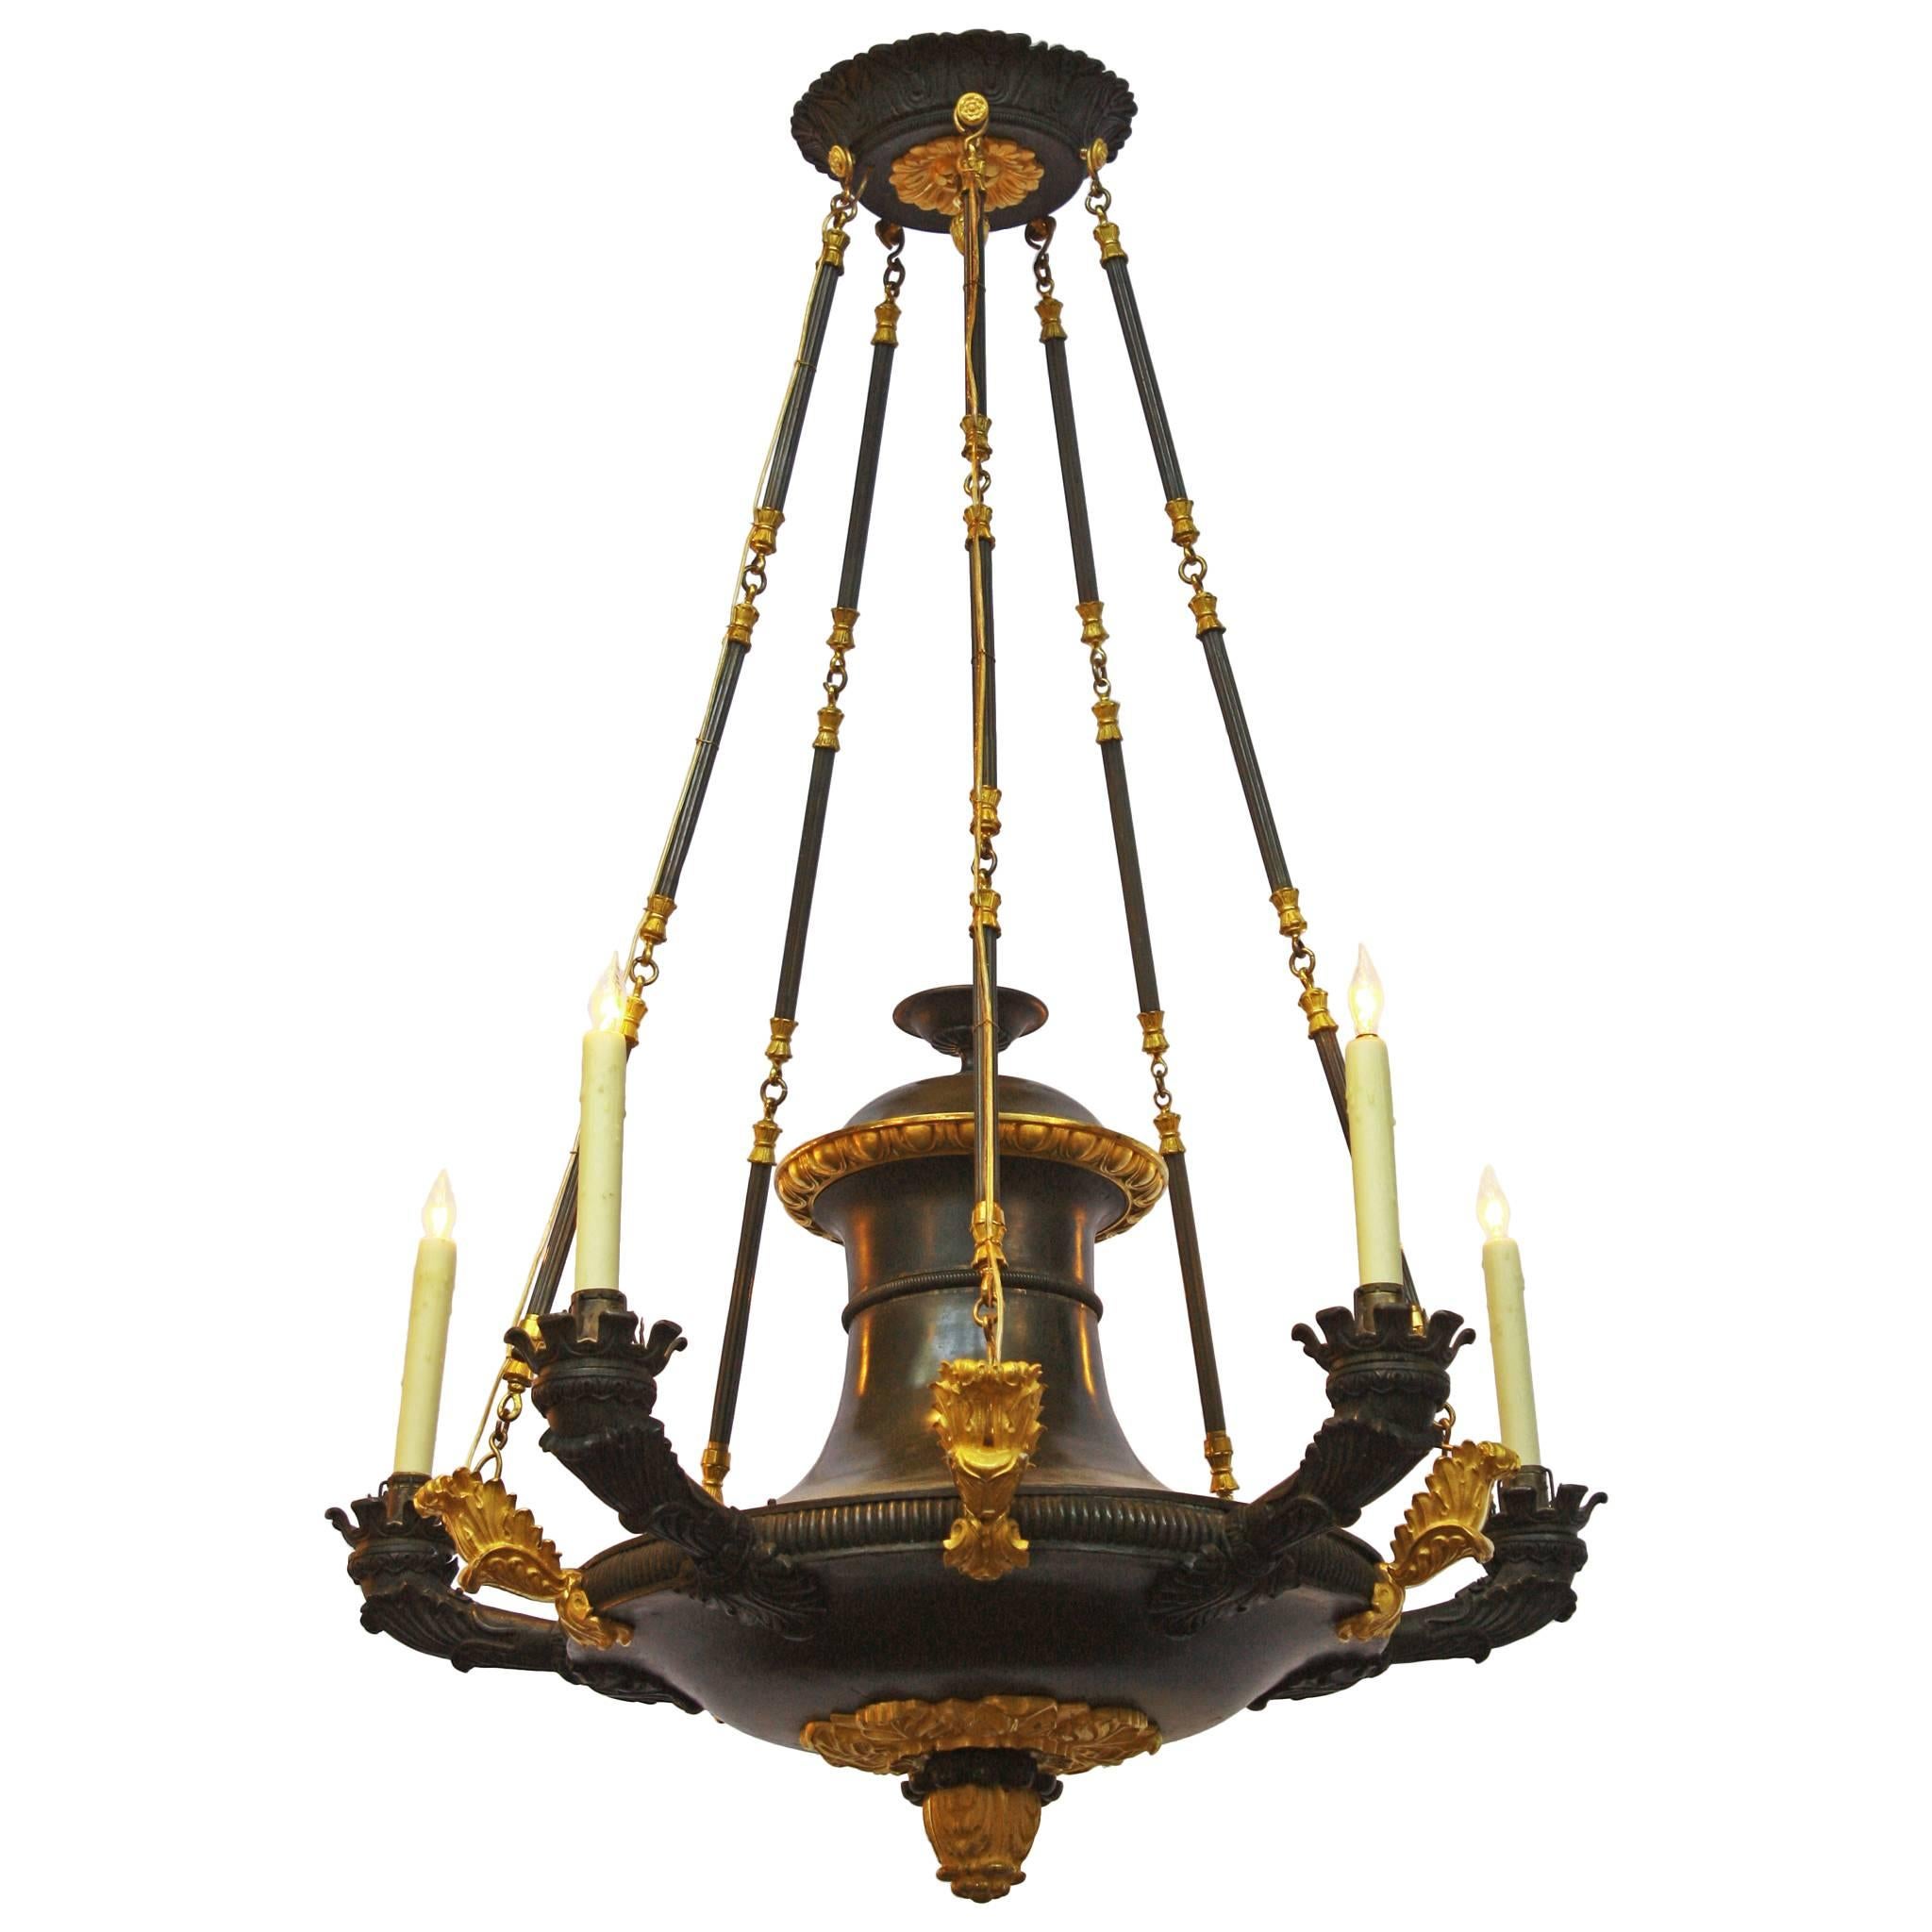 French Empire Patinated and Gilt Bronze Five-Arm Argon Chandelier